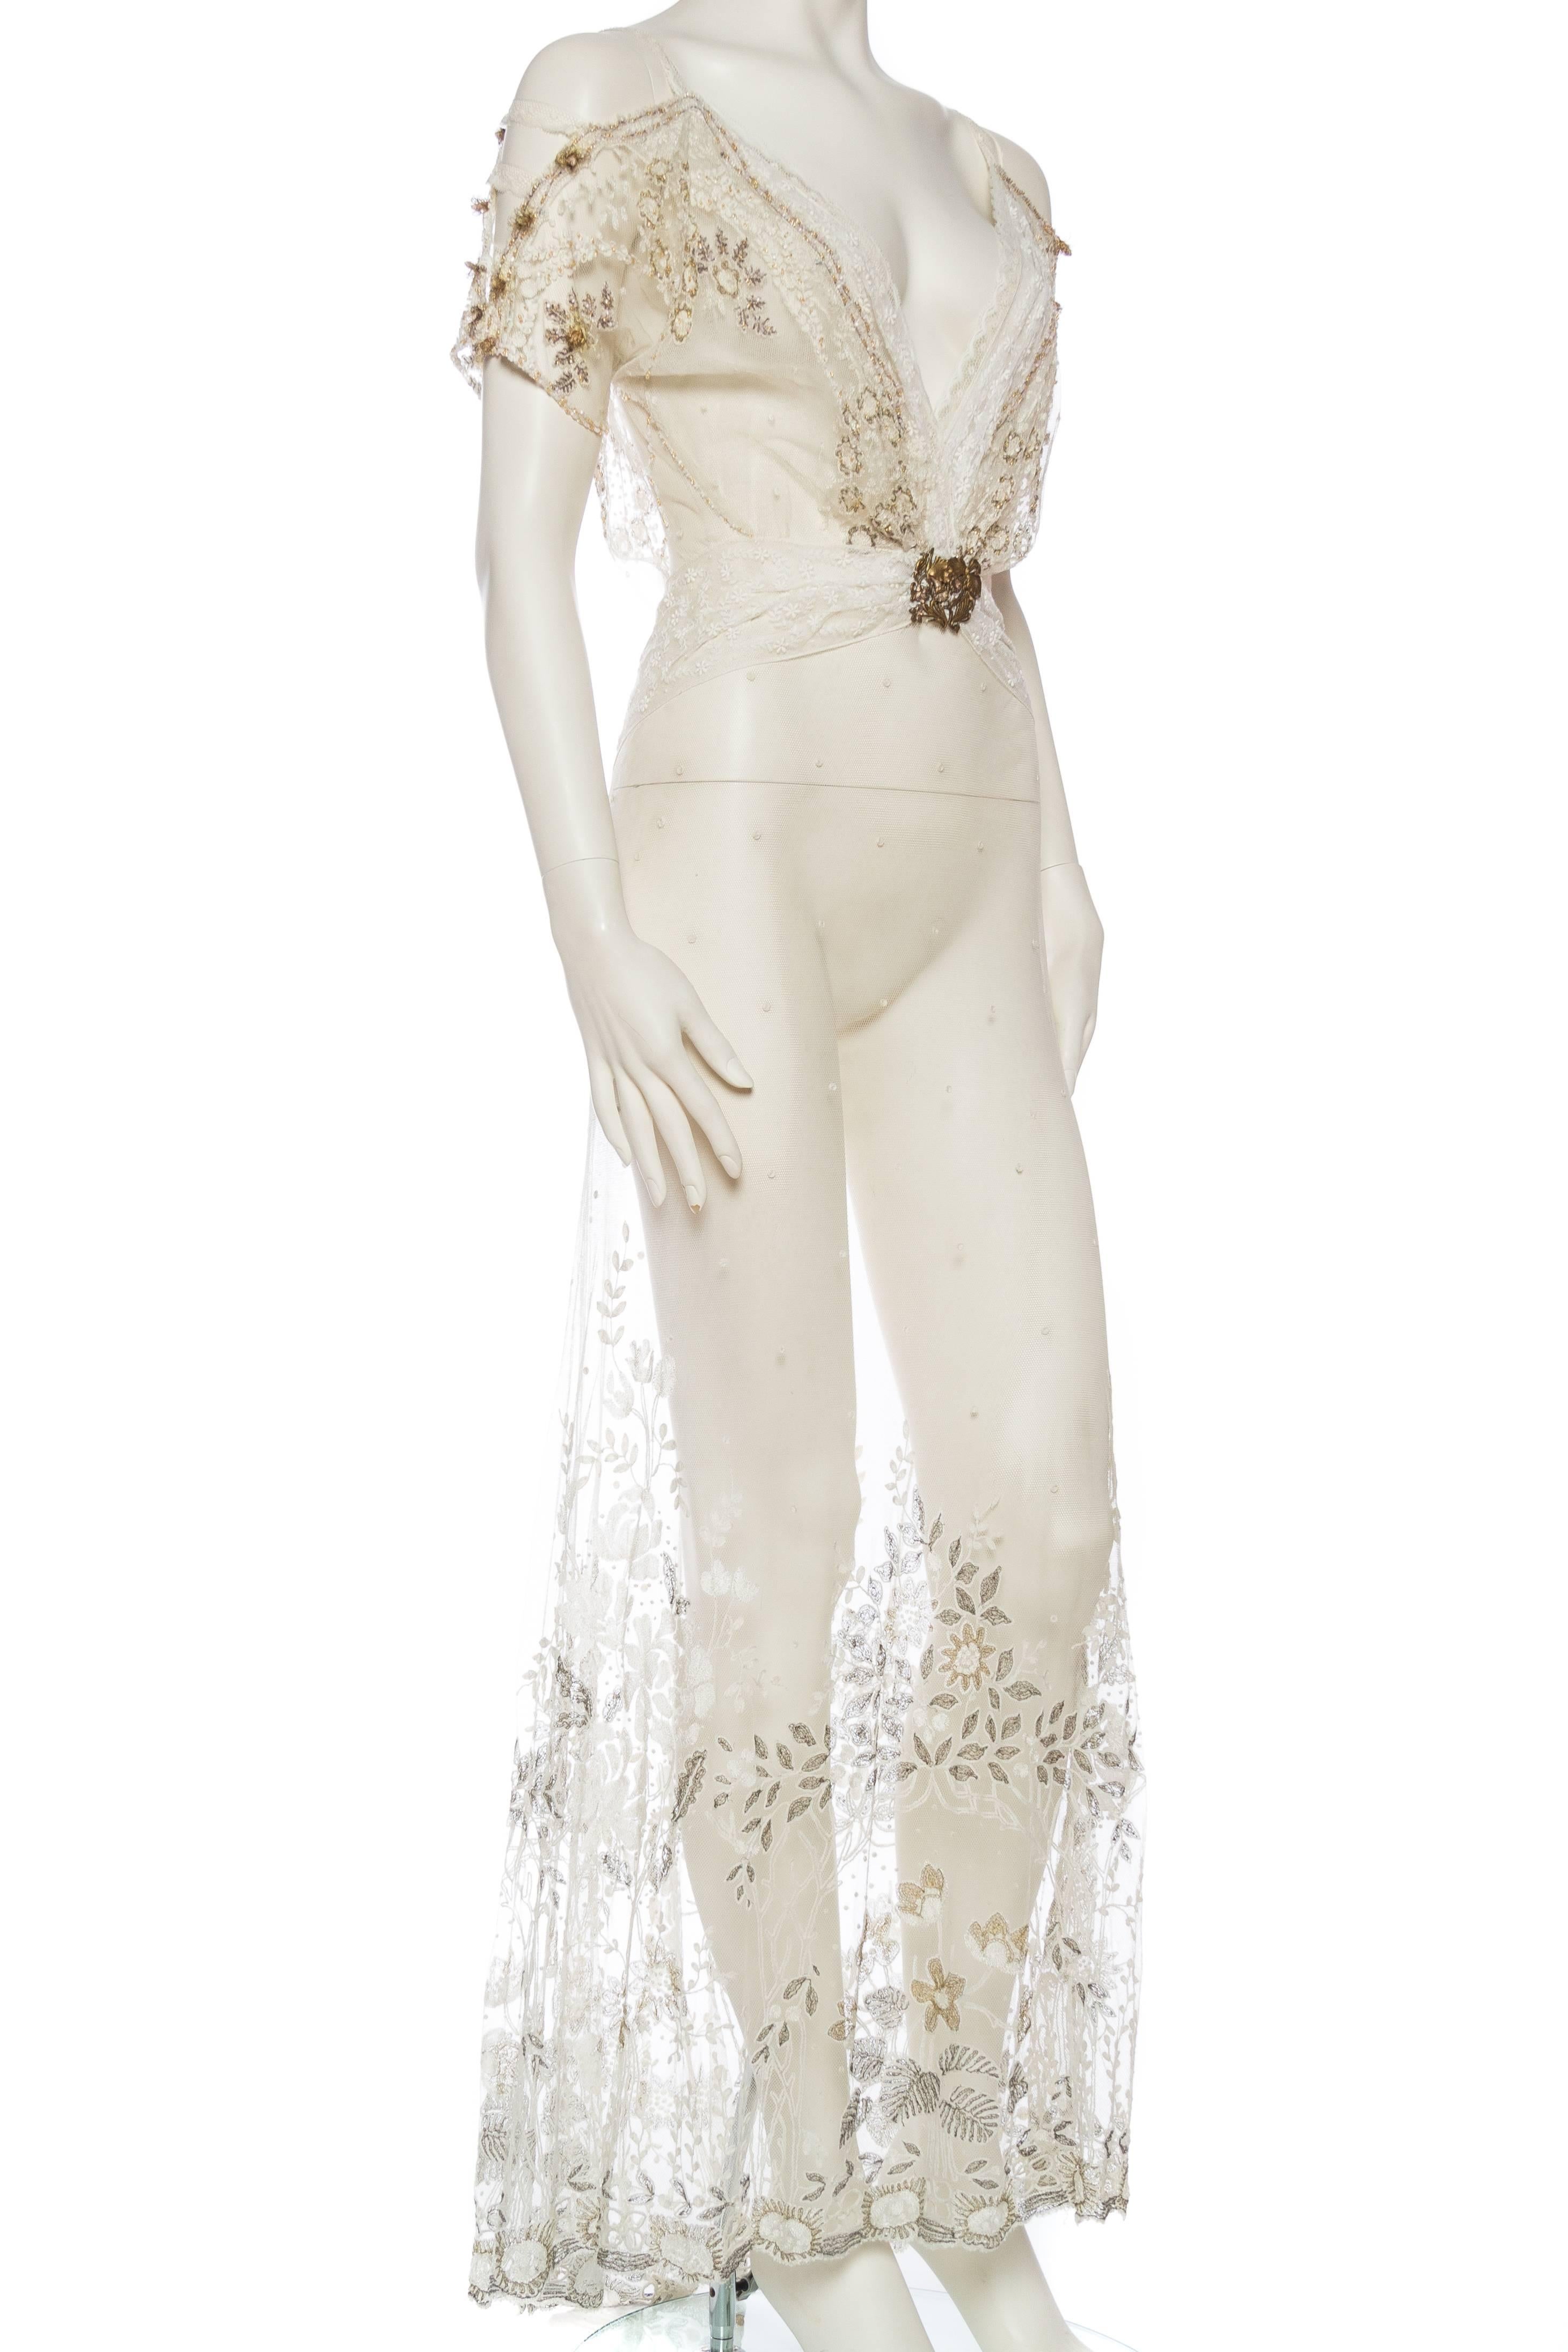 Beige Sheer Edwardian Metallic Embroidered and Beaded Lace Dress